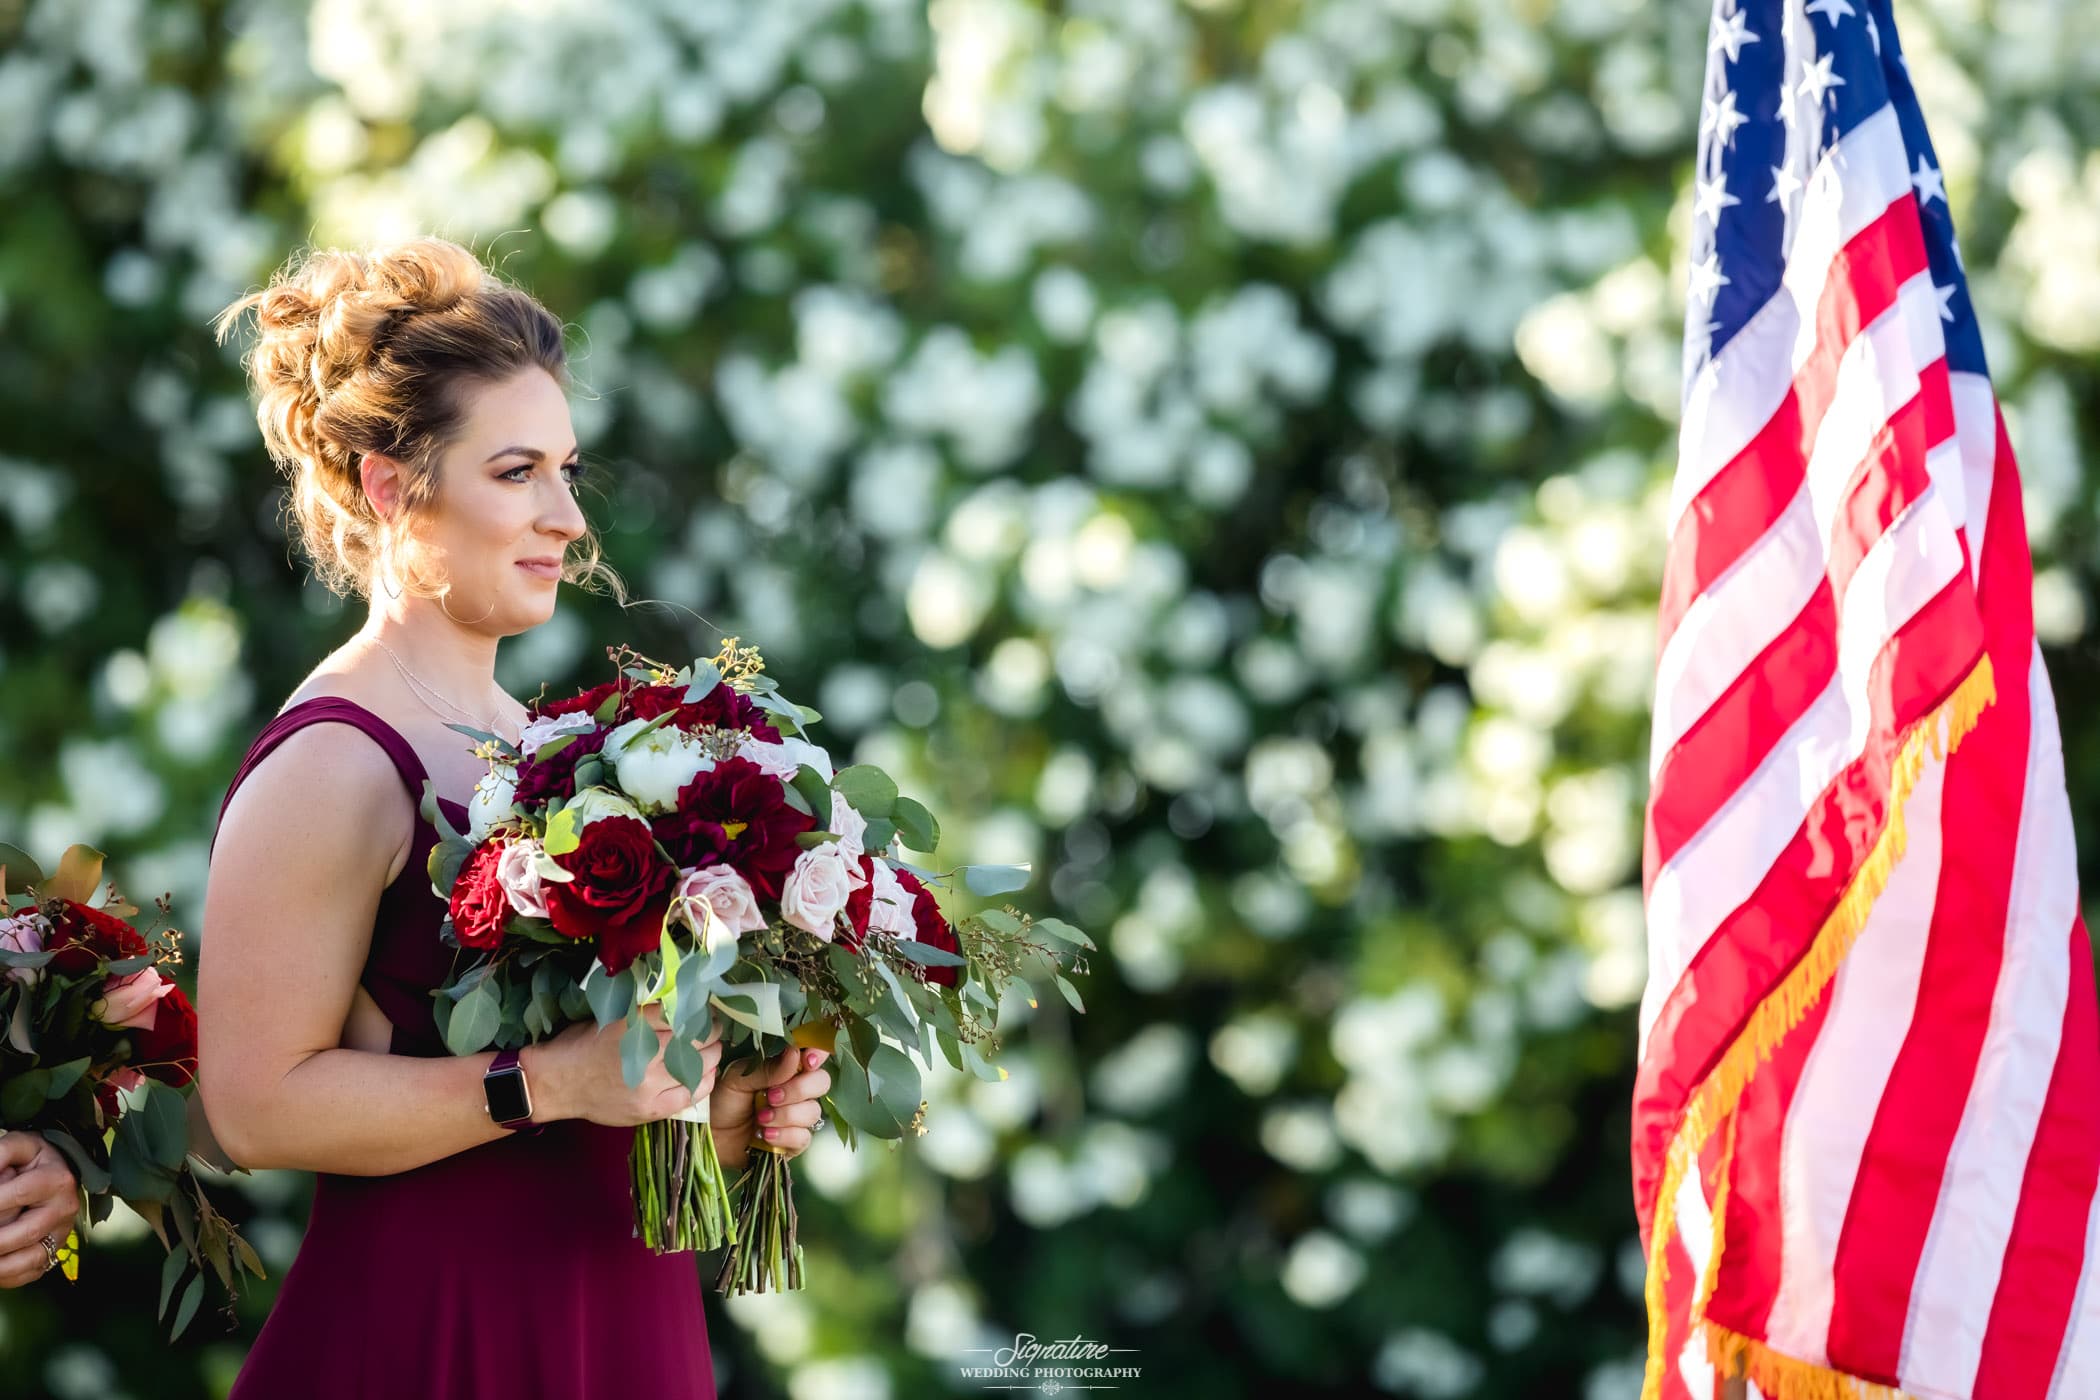 Maid of honor holding bouquet during ceremony